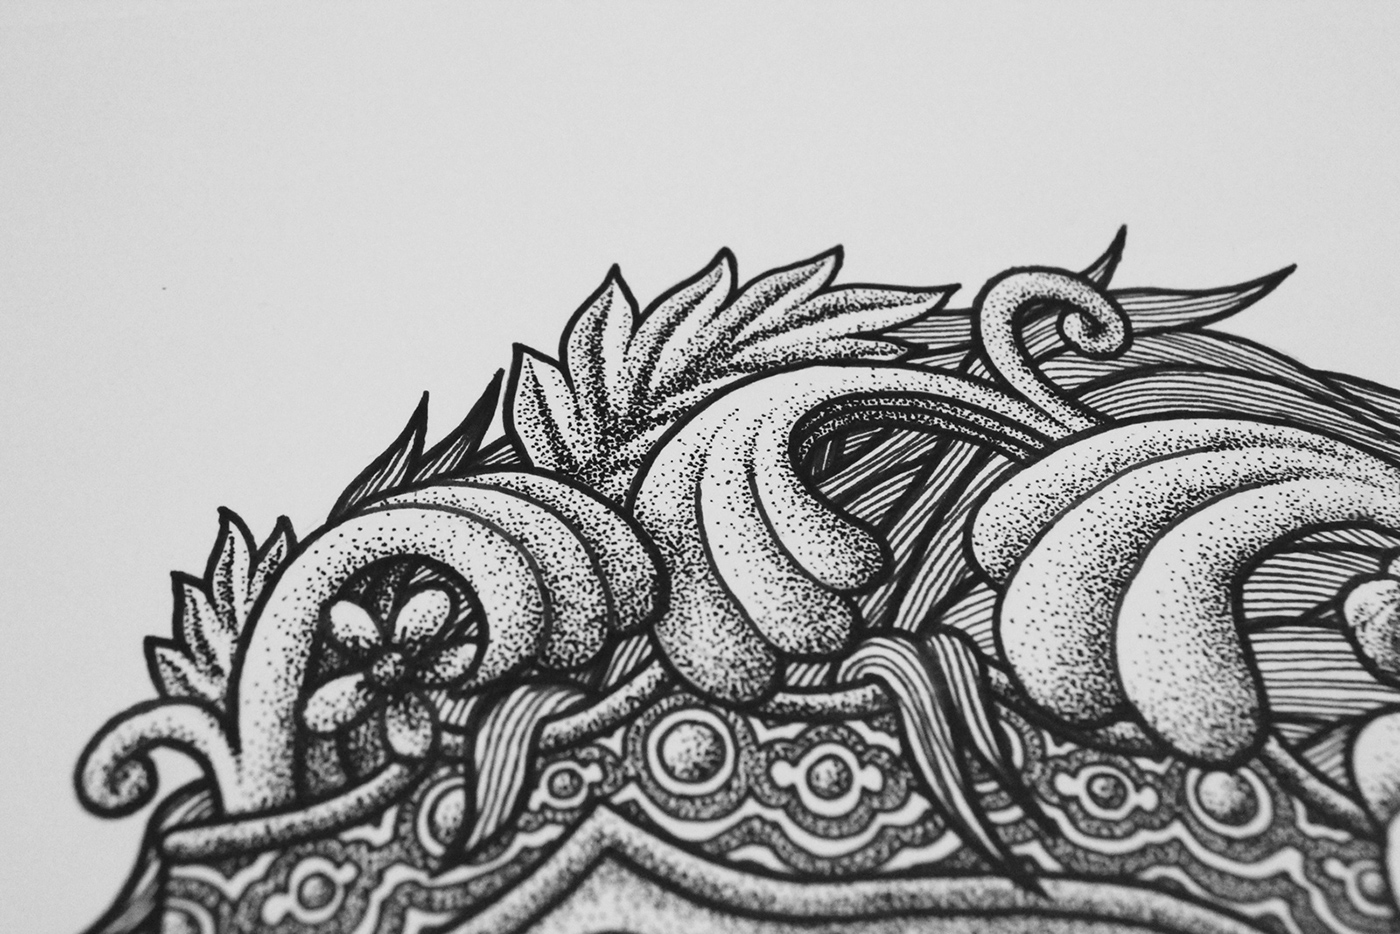 stipple pen and ink pen ink barong spirit